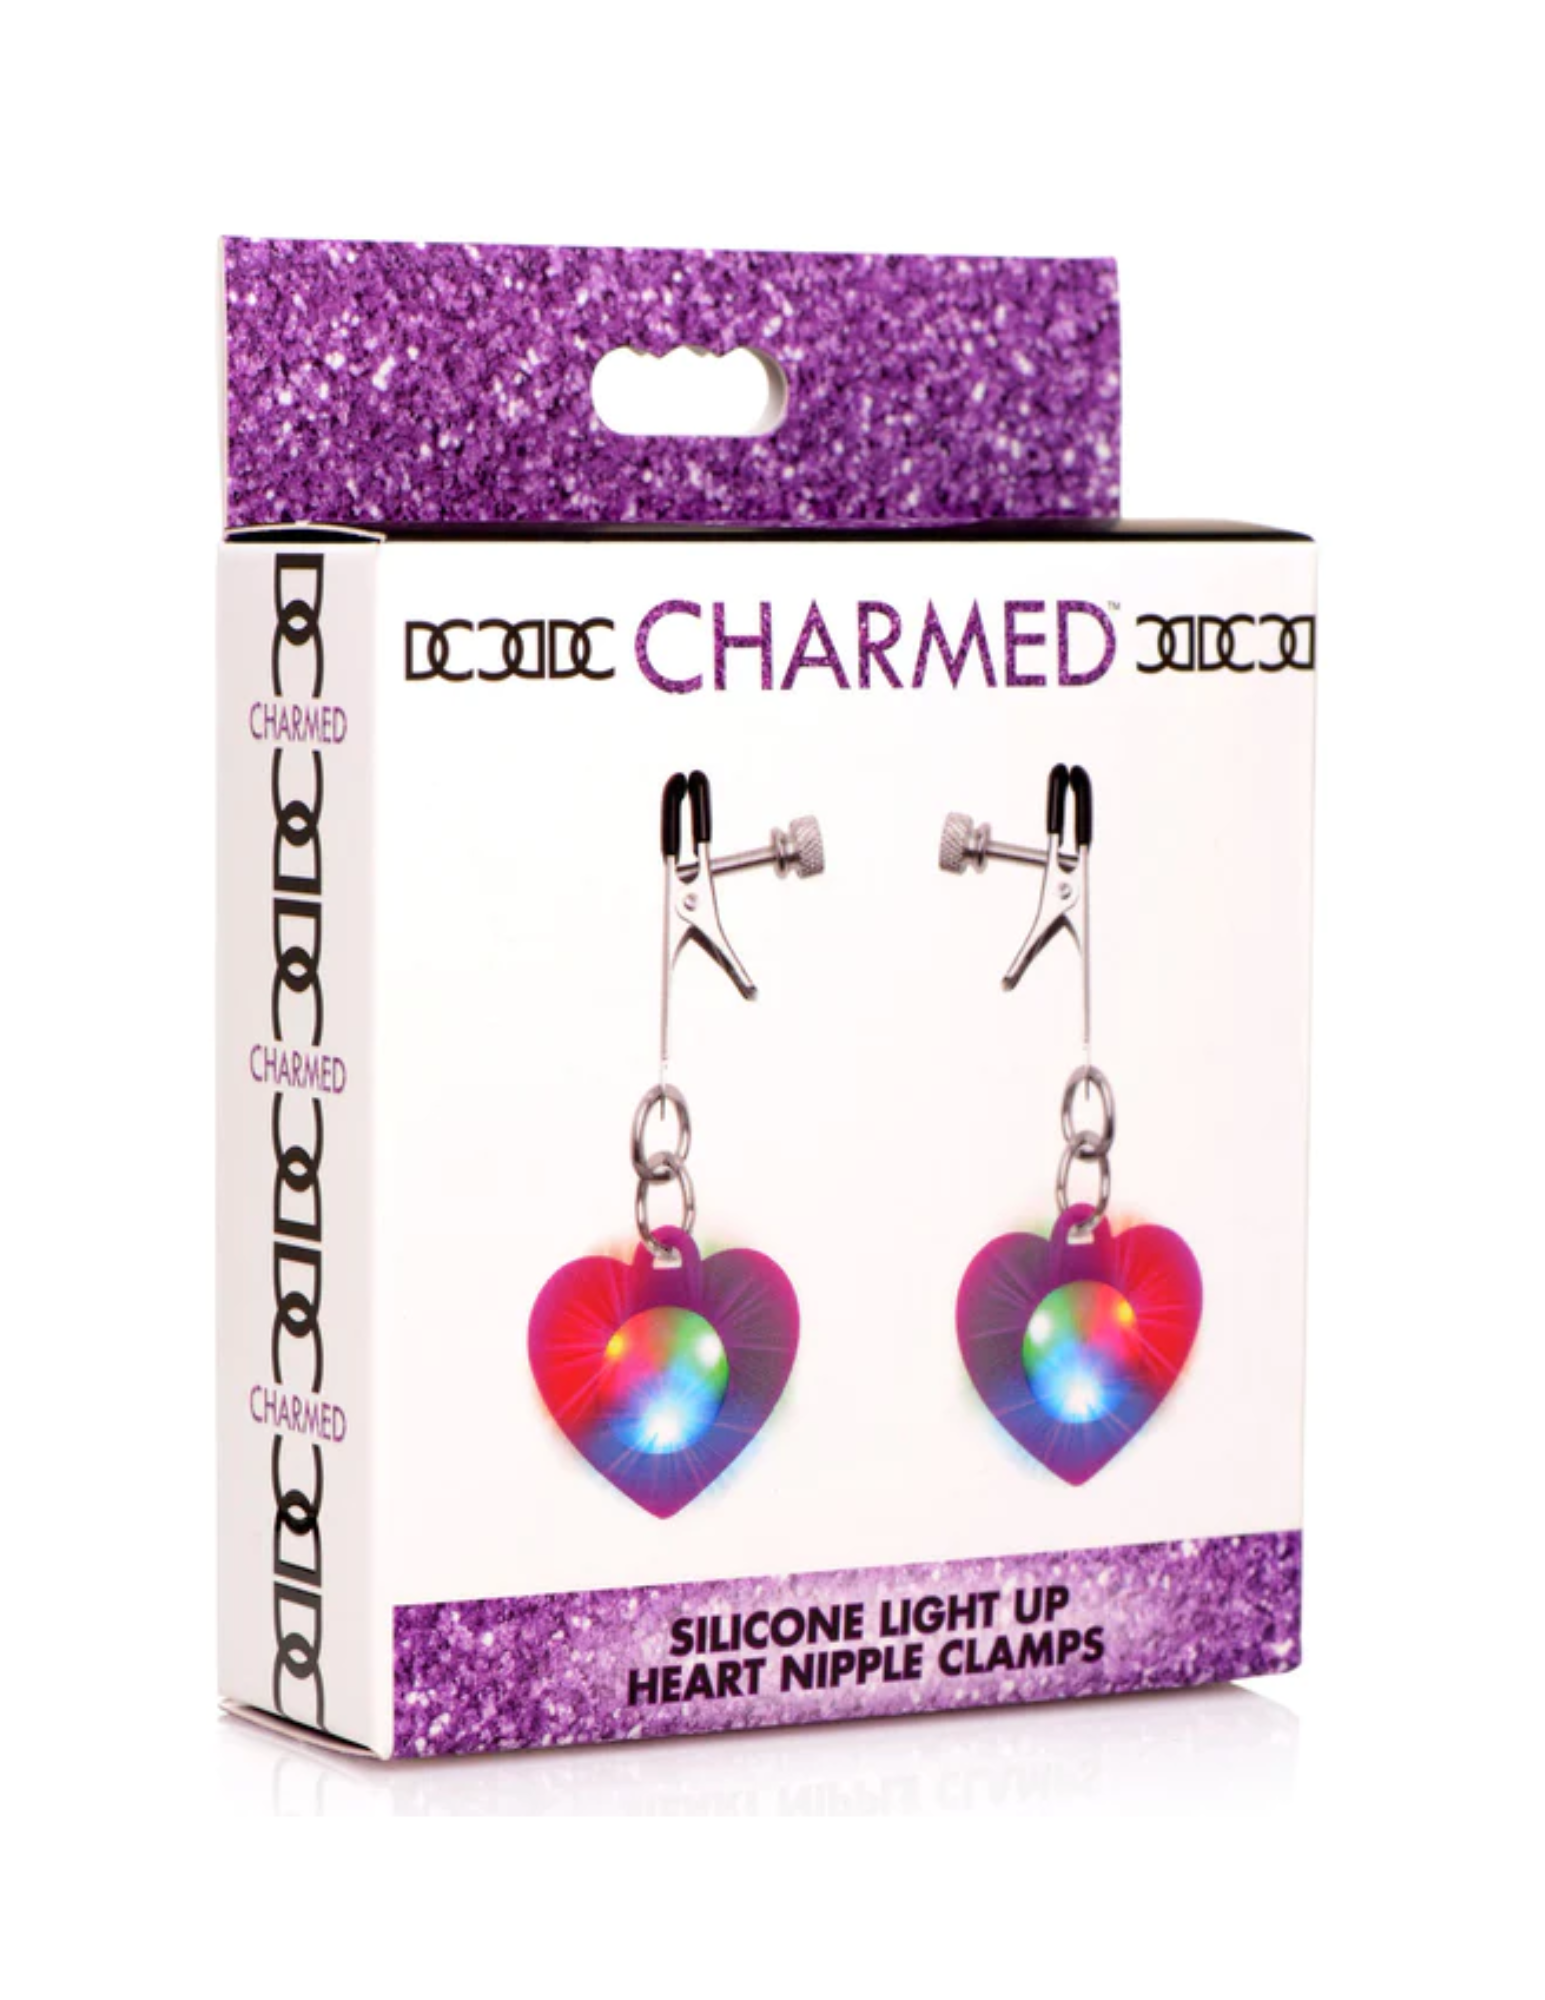 Charmed Silicone Light-Up Heart Nipple Clamps (purple) in package.